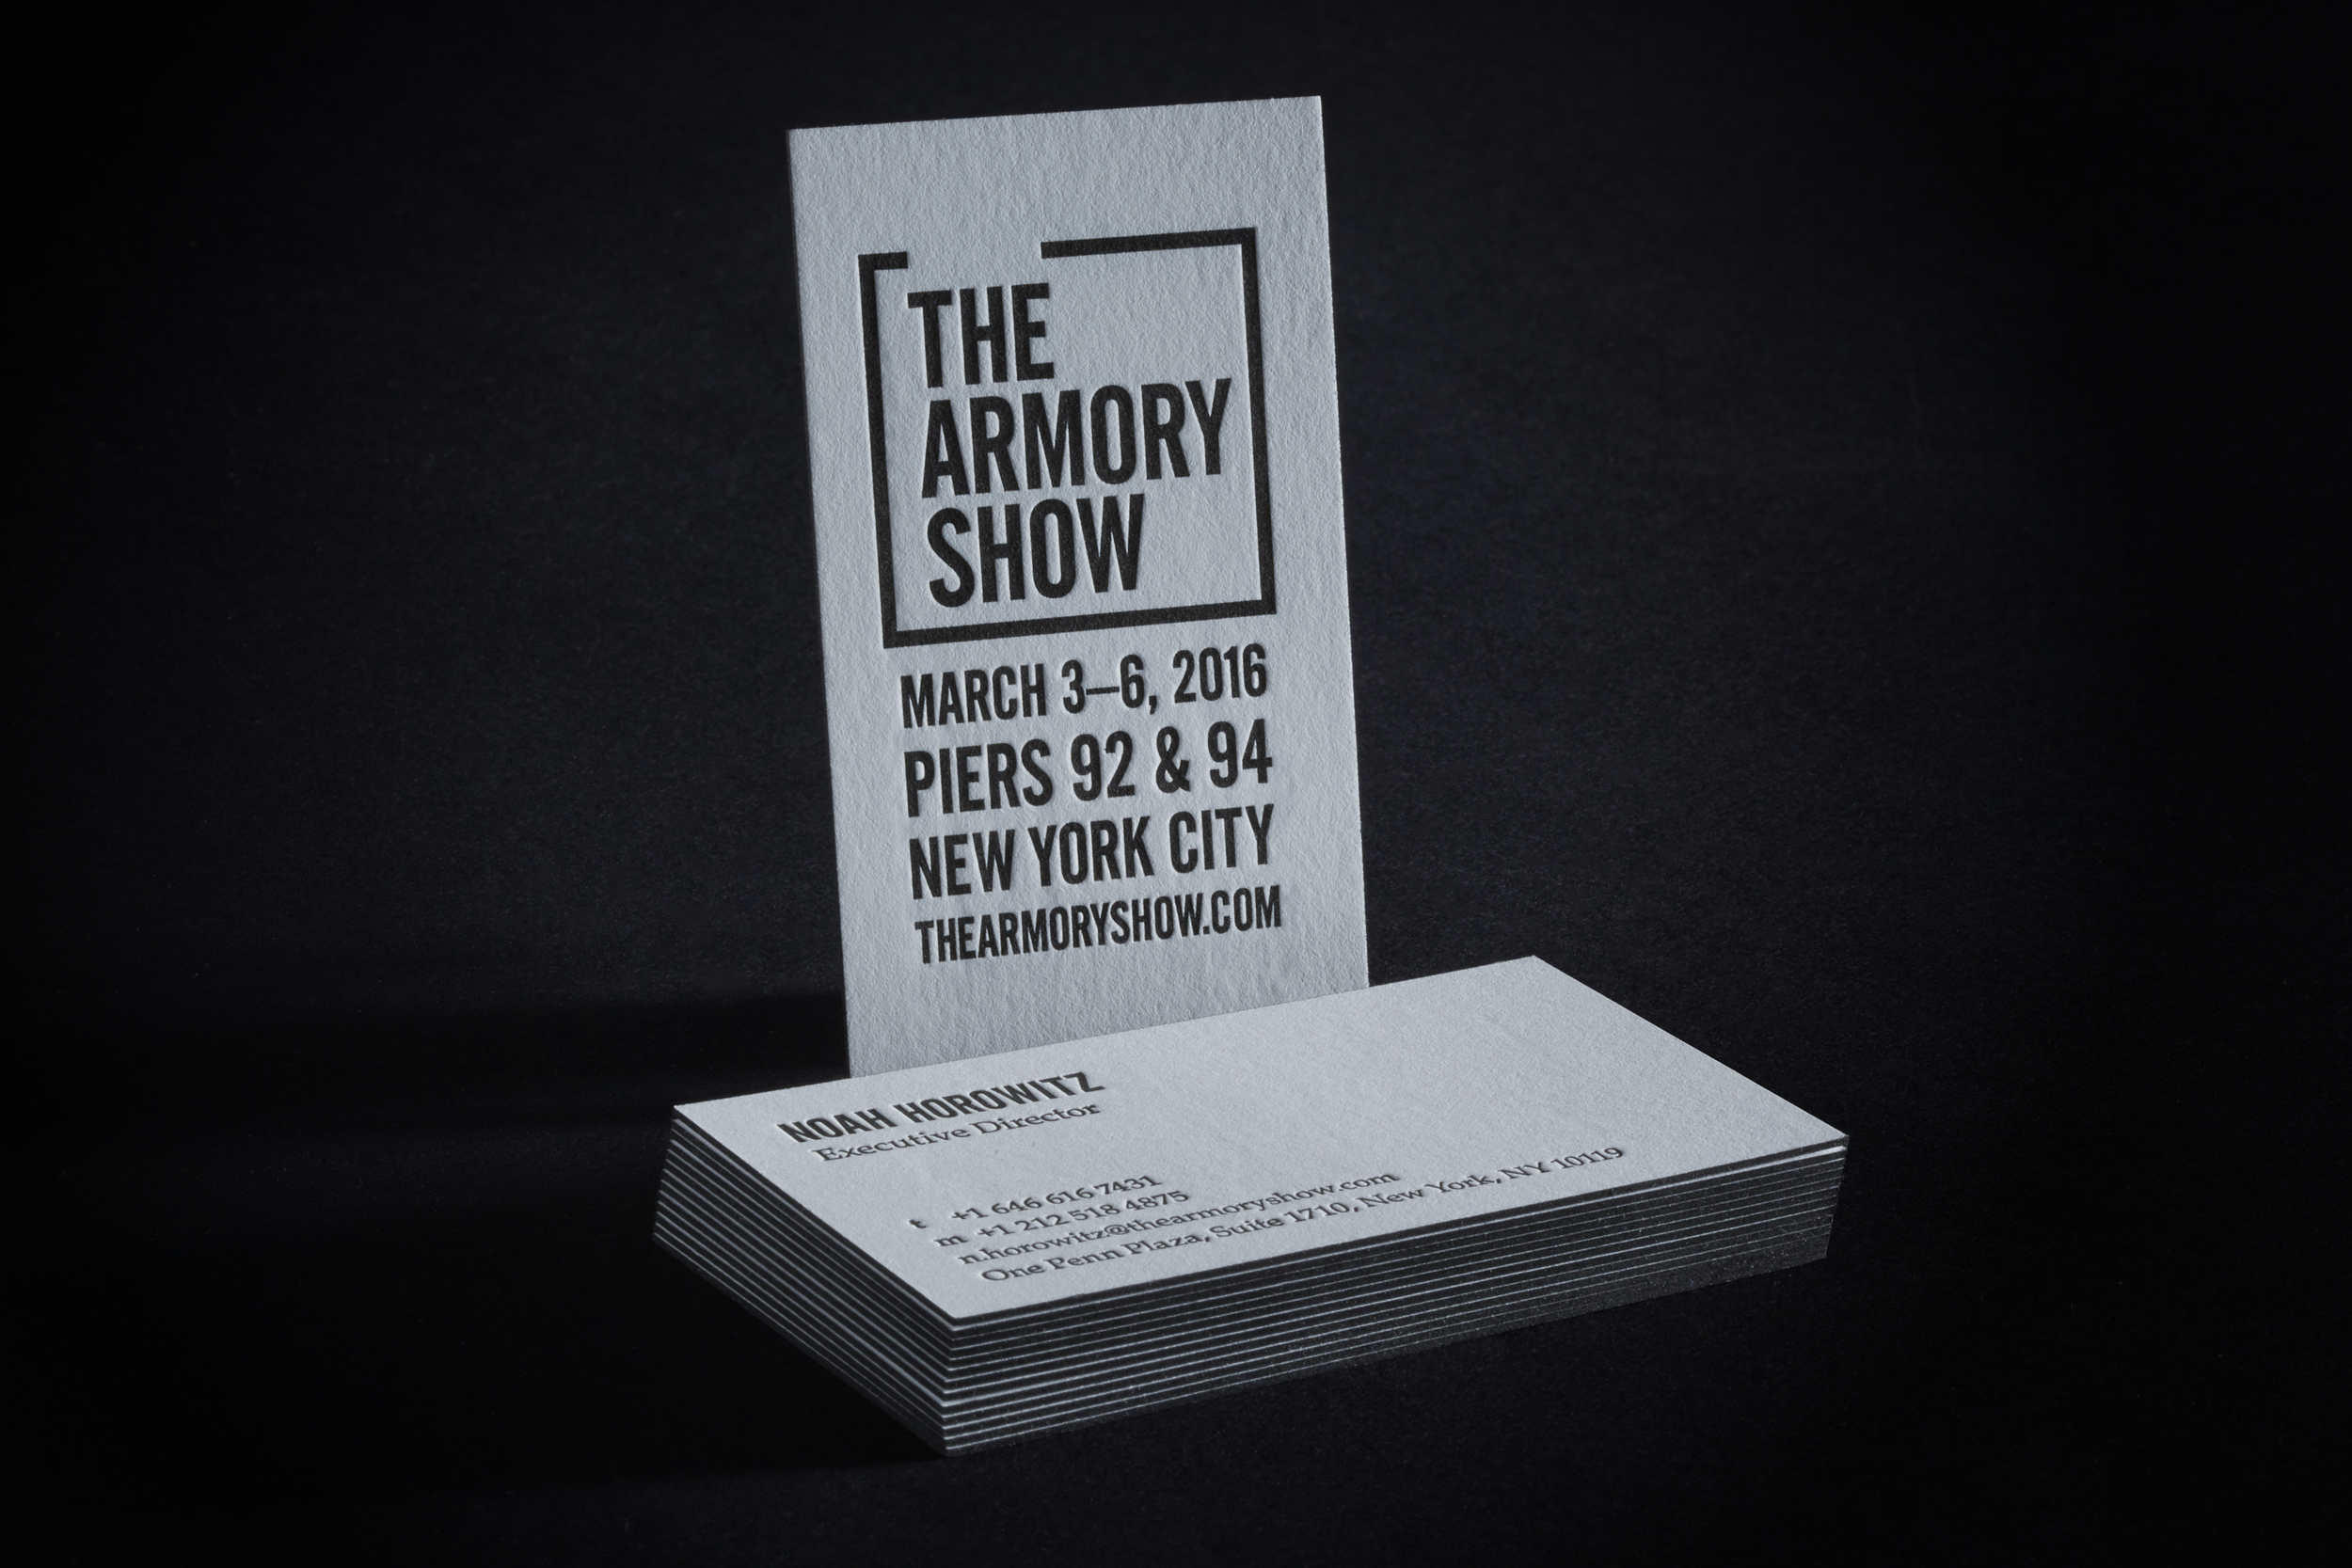 THE ARMORY SHOW 